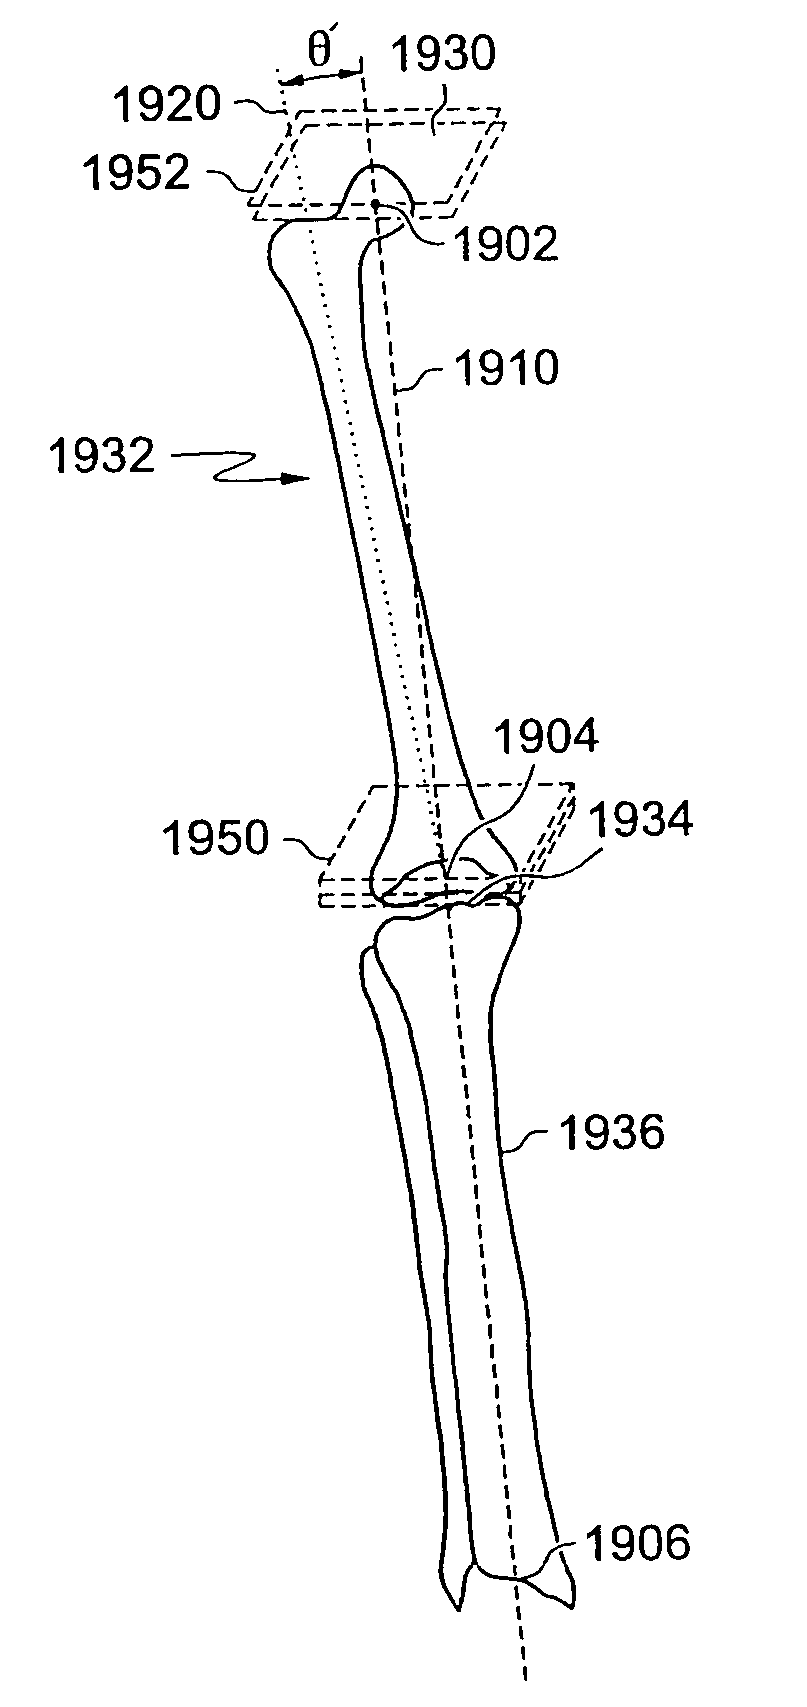 Patient selectable joint arthroplasty devices and surgical tools facilitating increased accuracy, speed and simplicity in performing total and partial joint arthroplasty